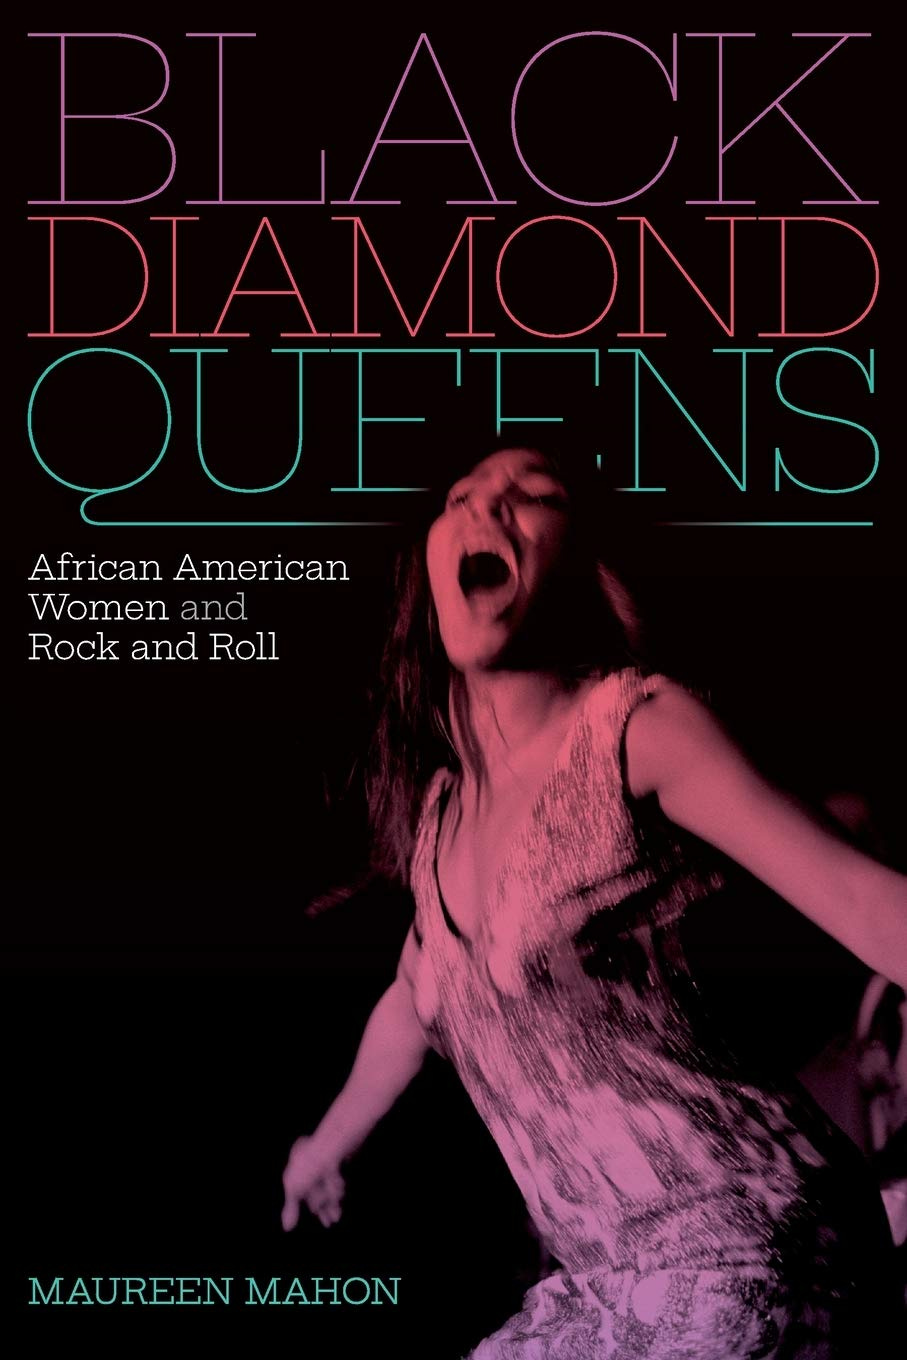 Black Diamond Queens: African American Women and Rock and Roll (Refiguring  American Music): Mahon, Maureen: 9781478011224: Amazon.com: Books